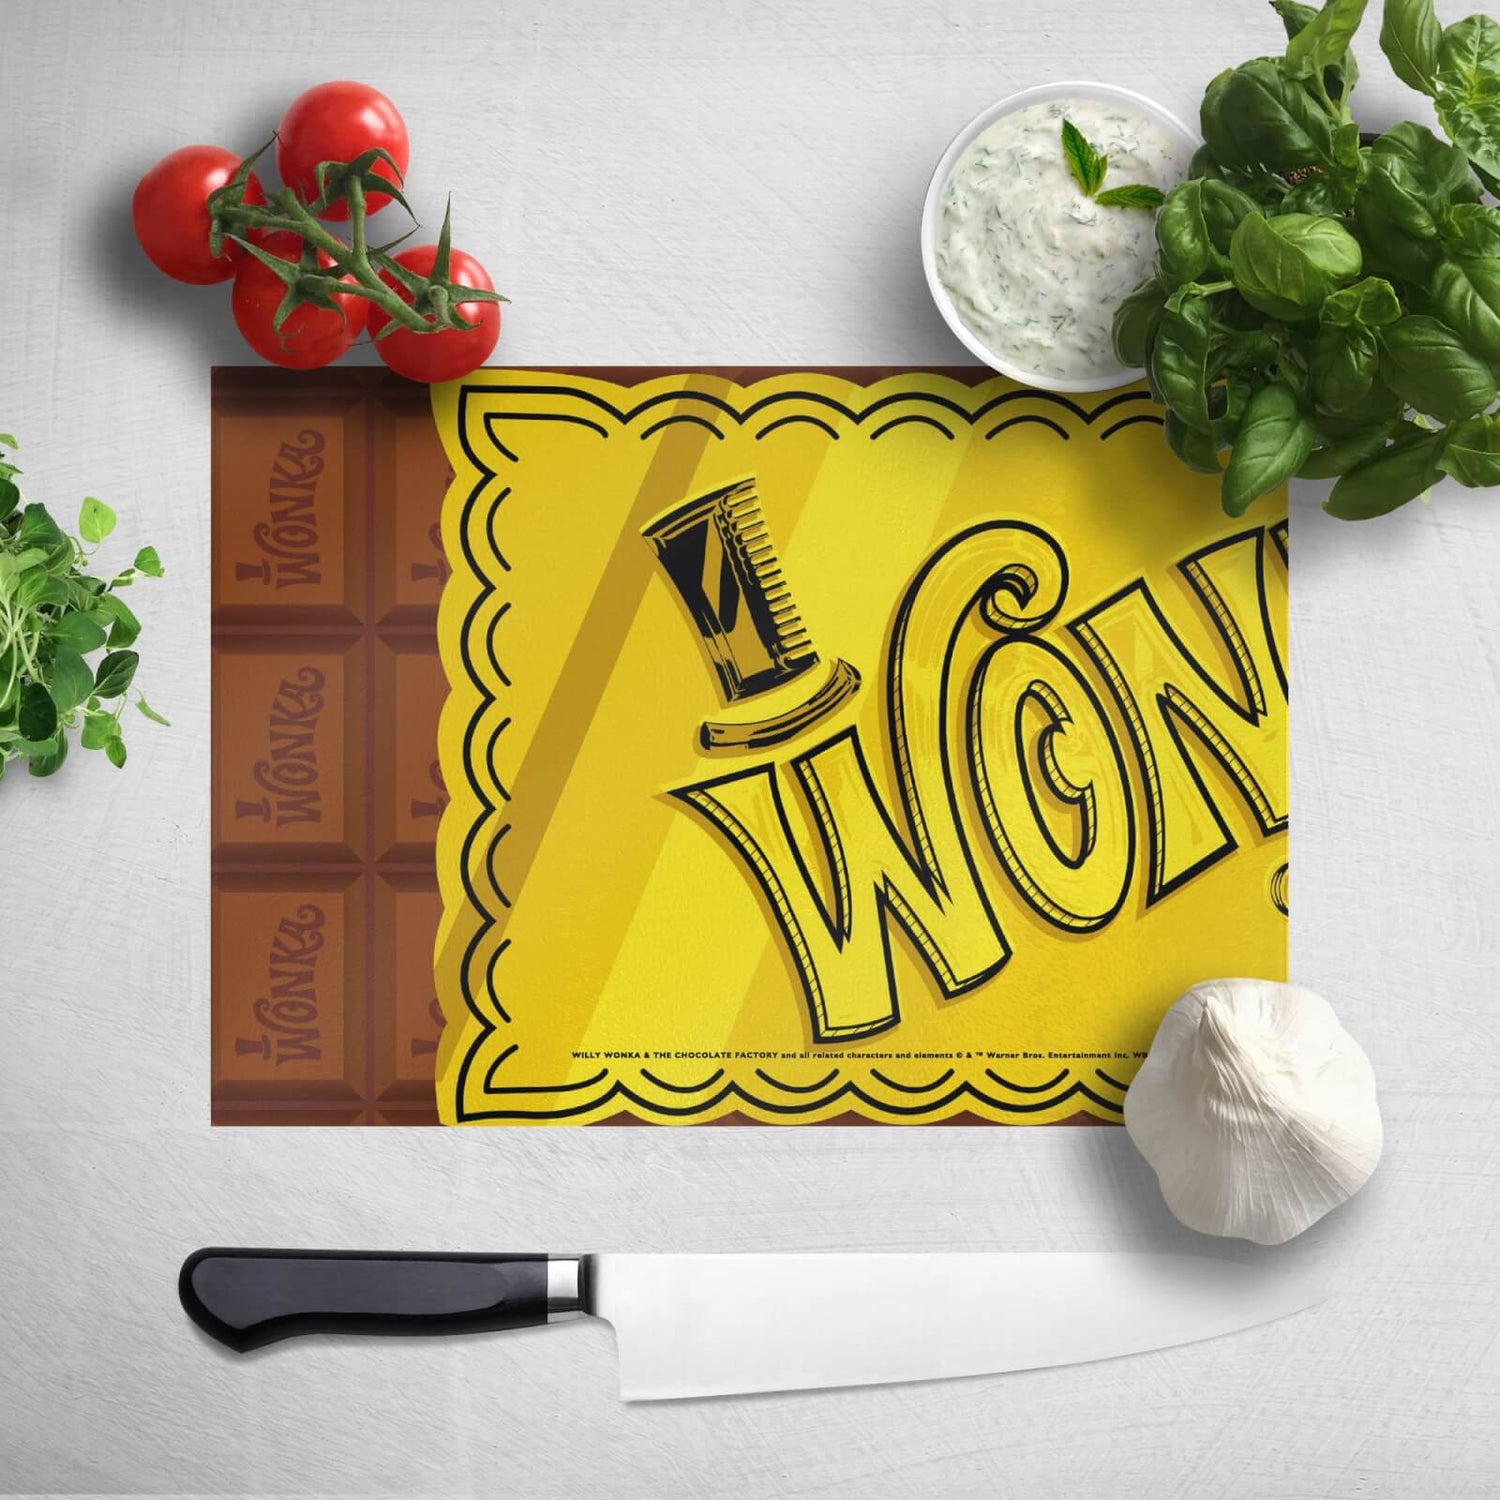 Willy Wonka & the Chocolate Factory Golden Ticket Chopping Board